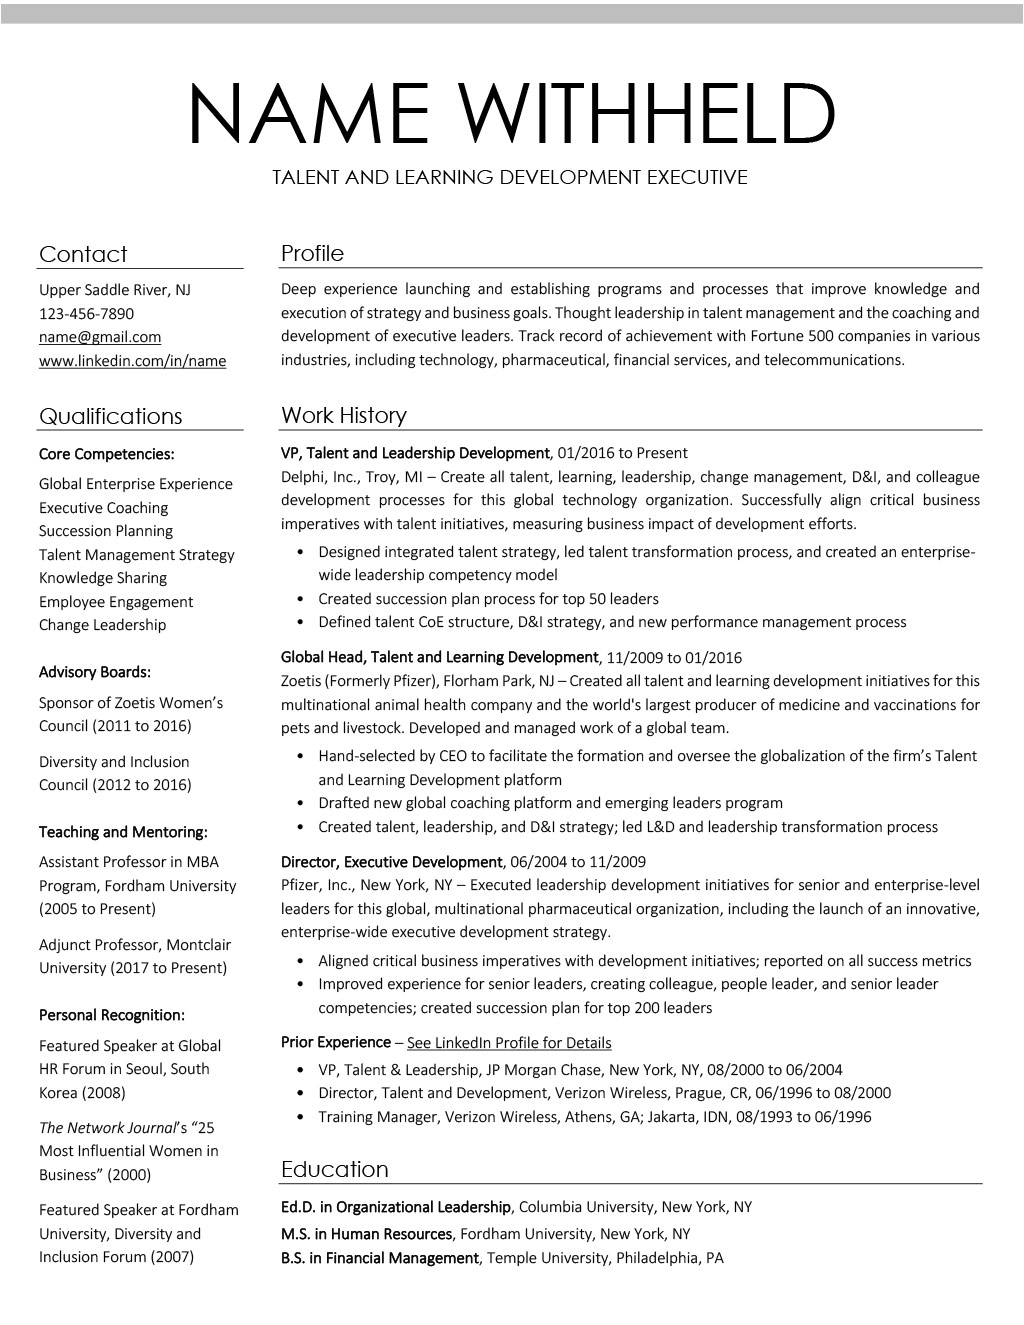 Questions For/About resume writing